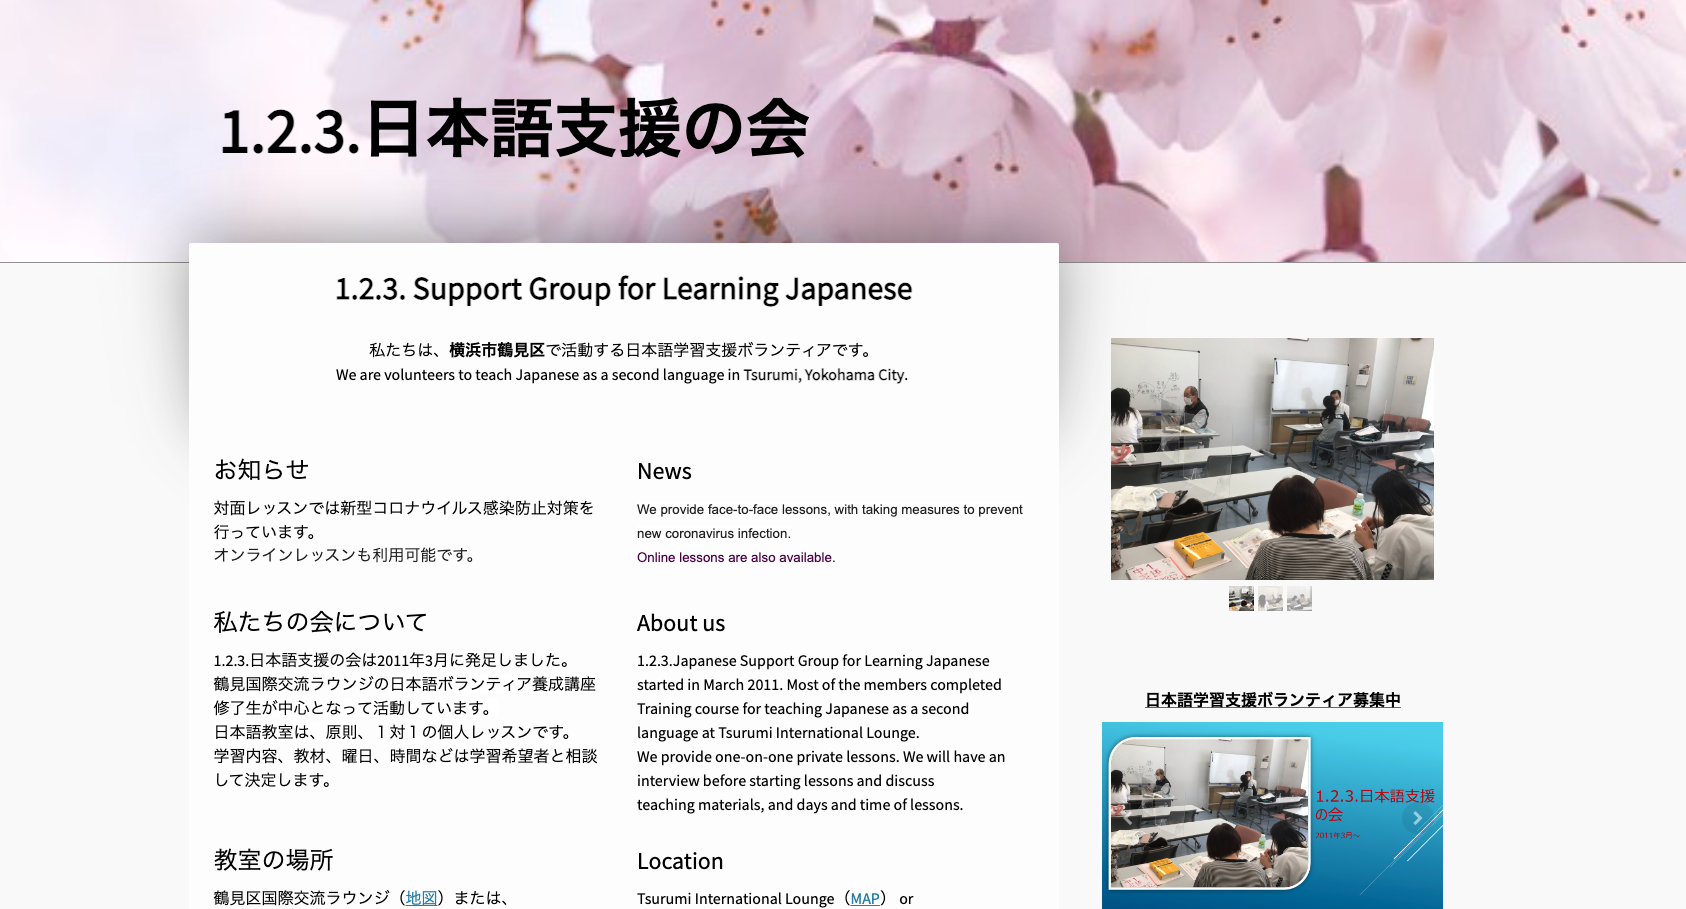 1.2.3. Japanese Support Club